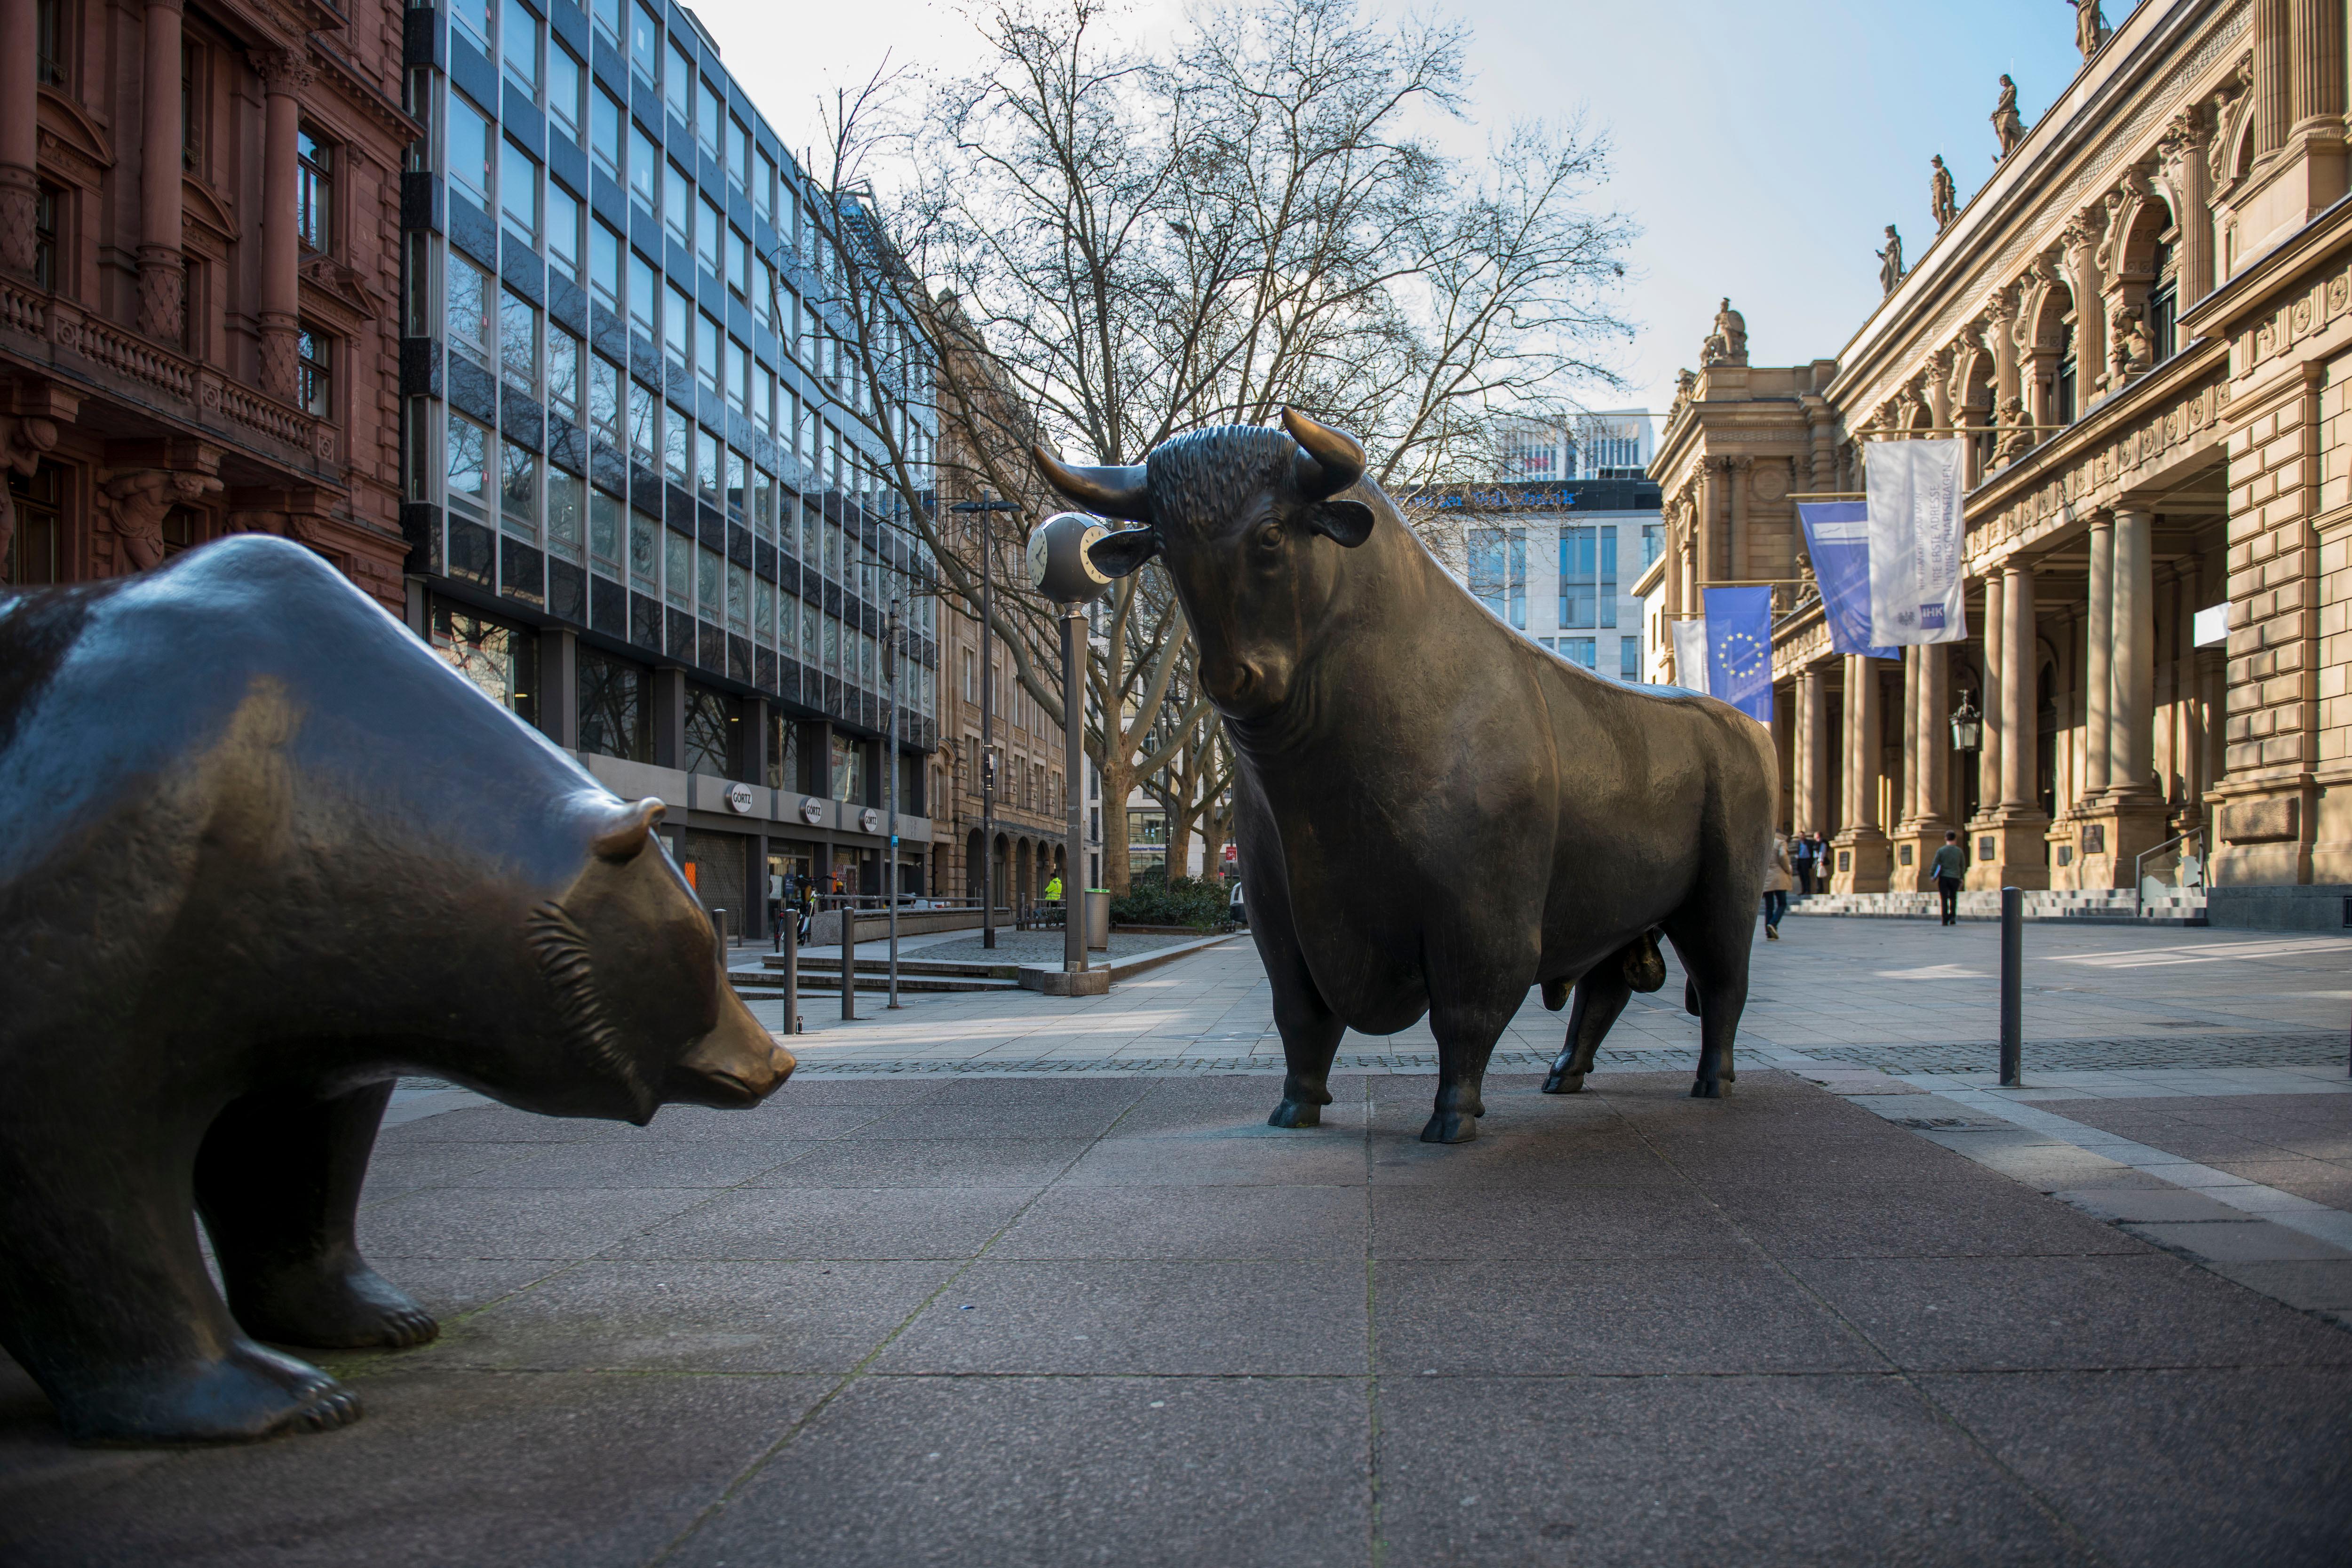 Bull and bear statues facing each other